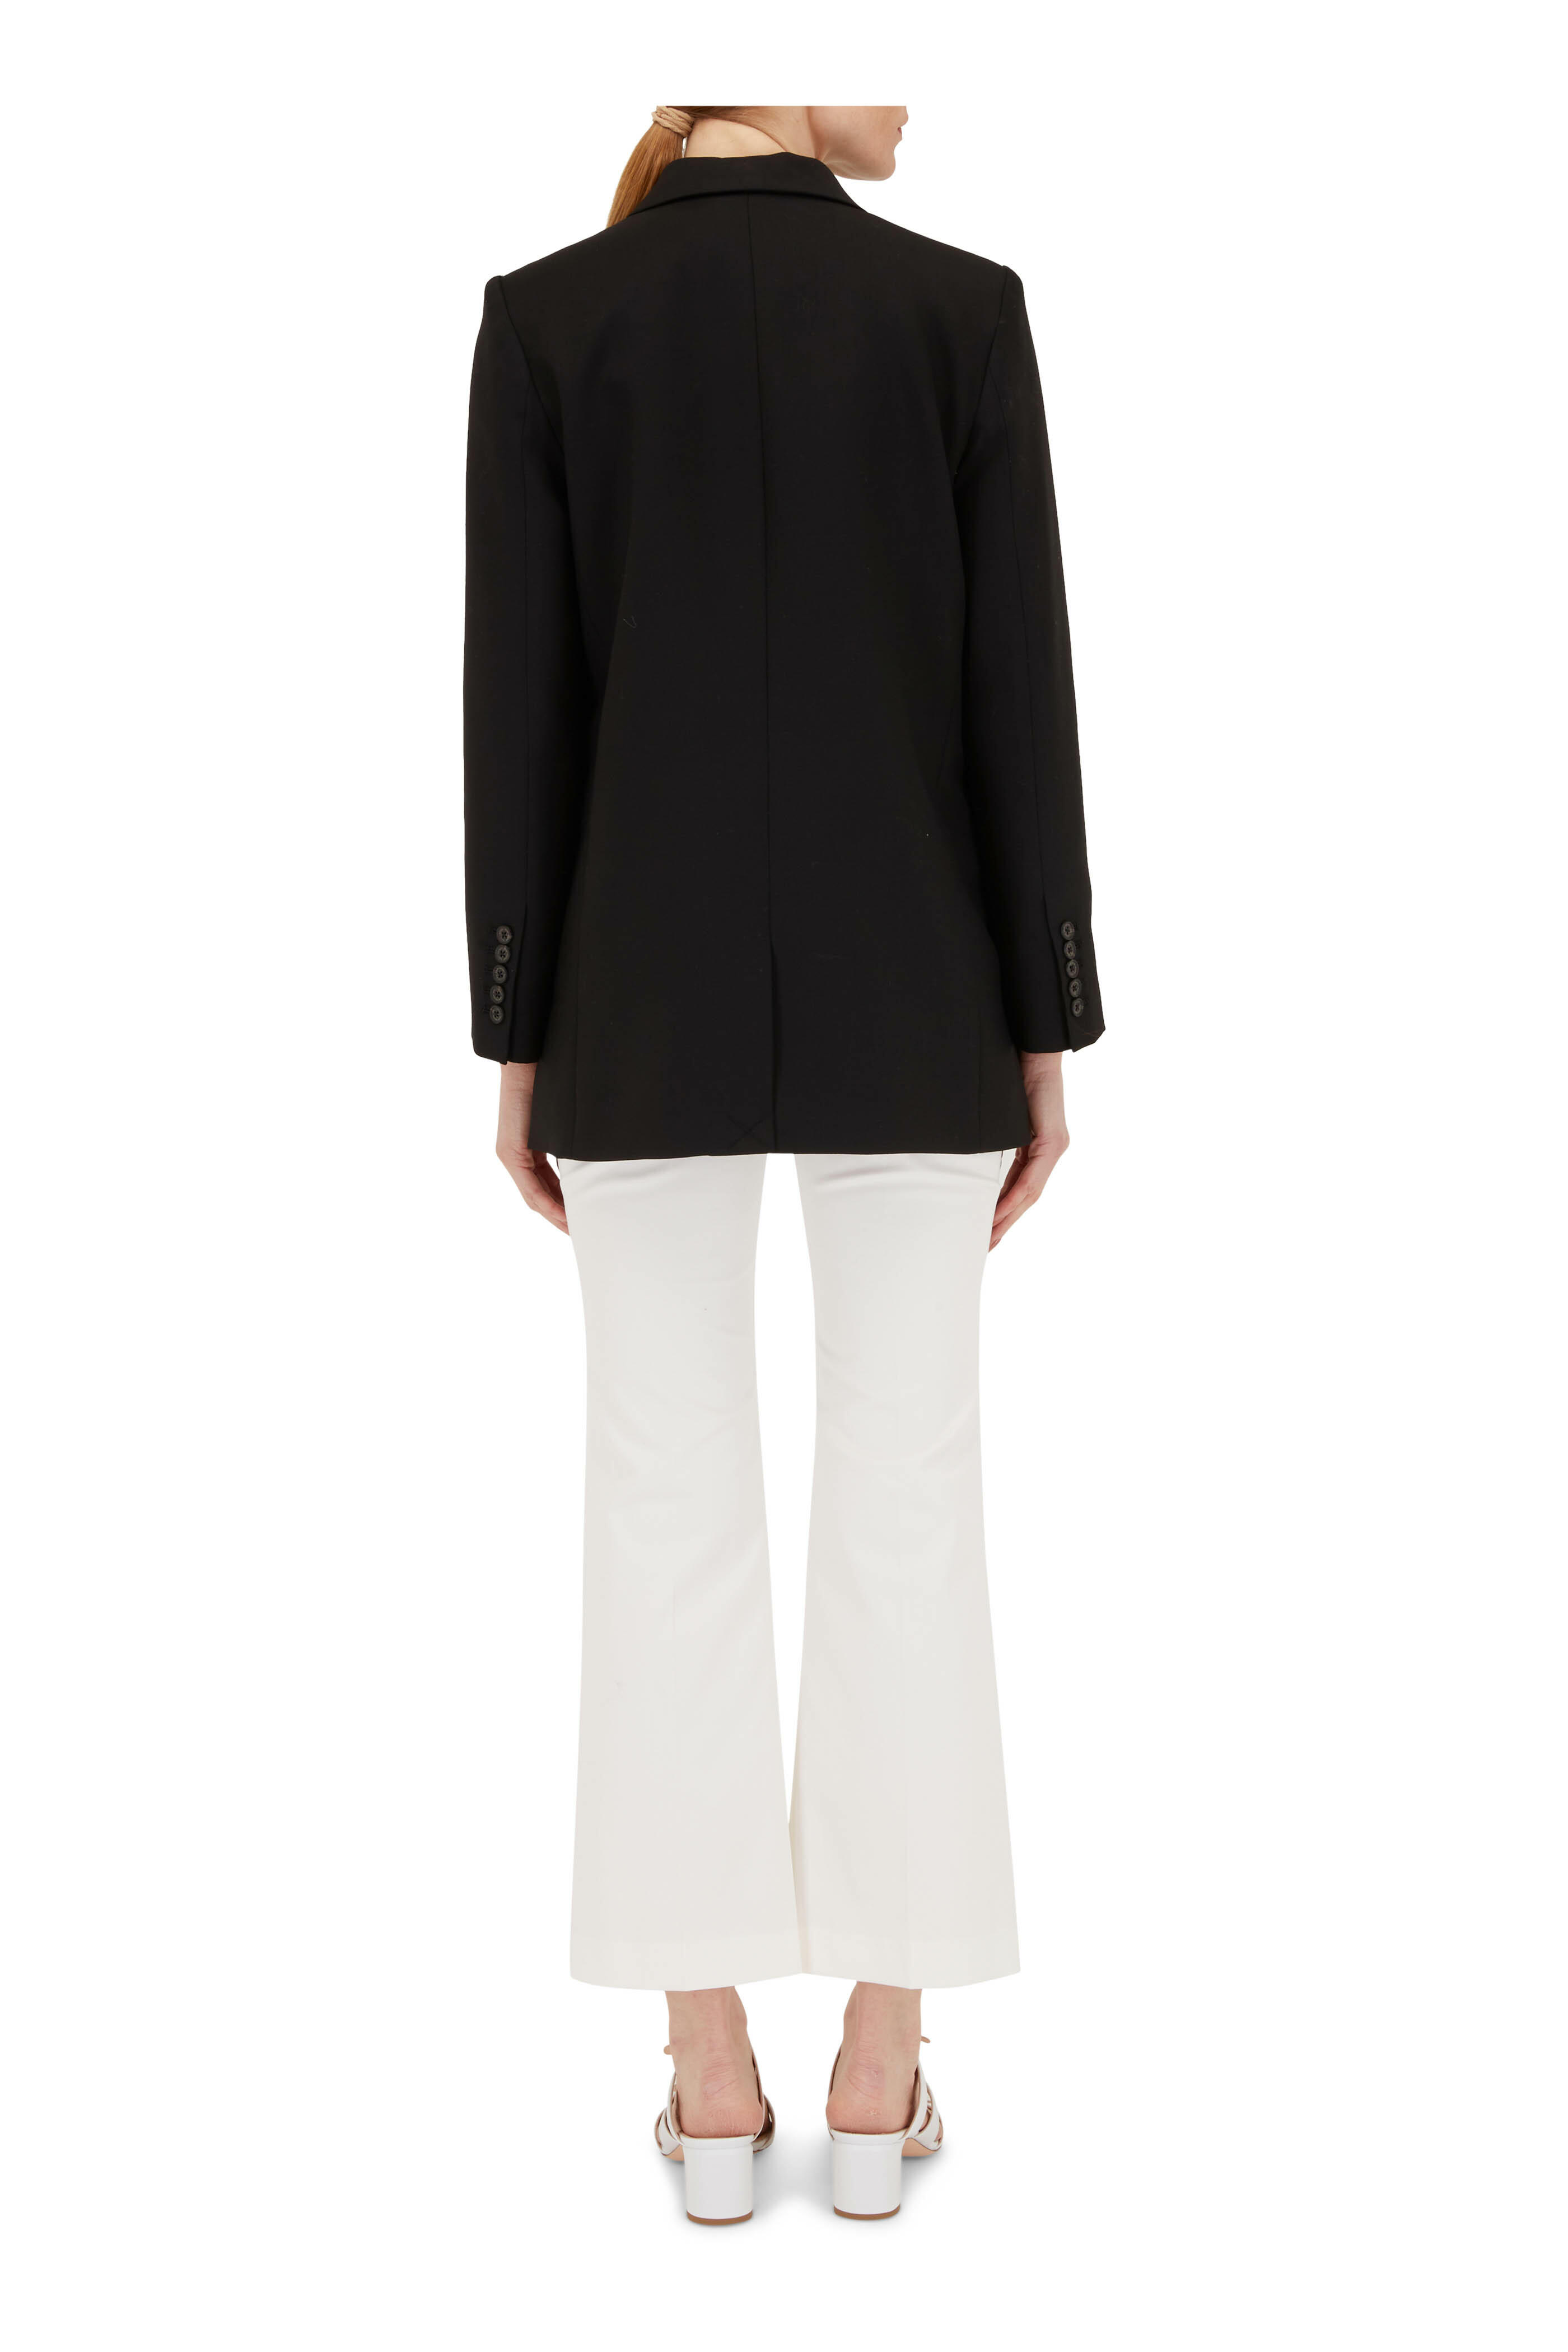 Brunello Cucinelli Outlet: trousers for women - Ivory